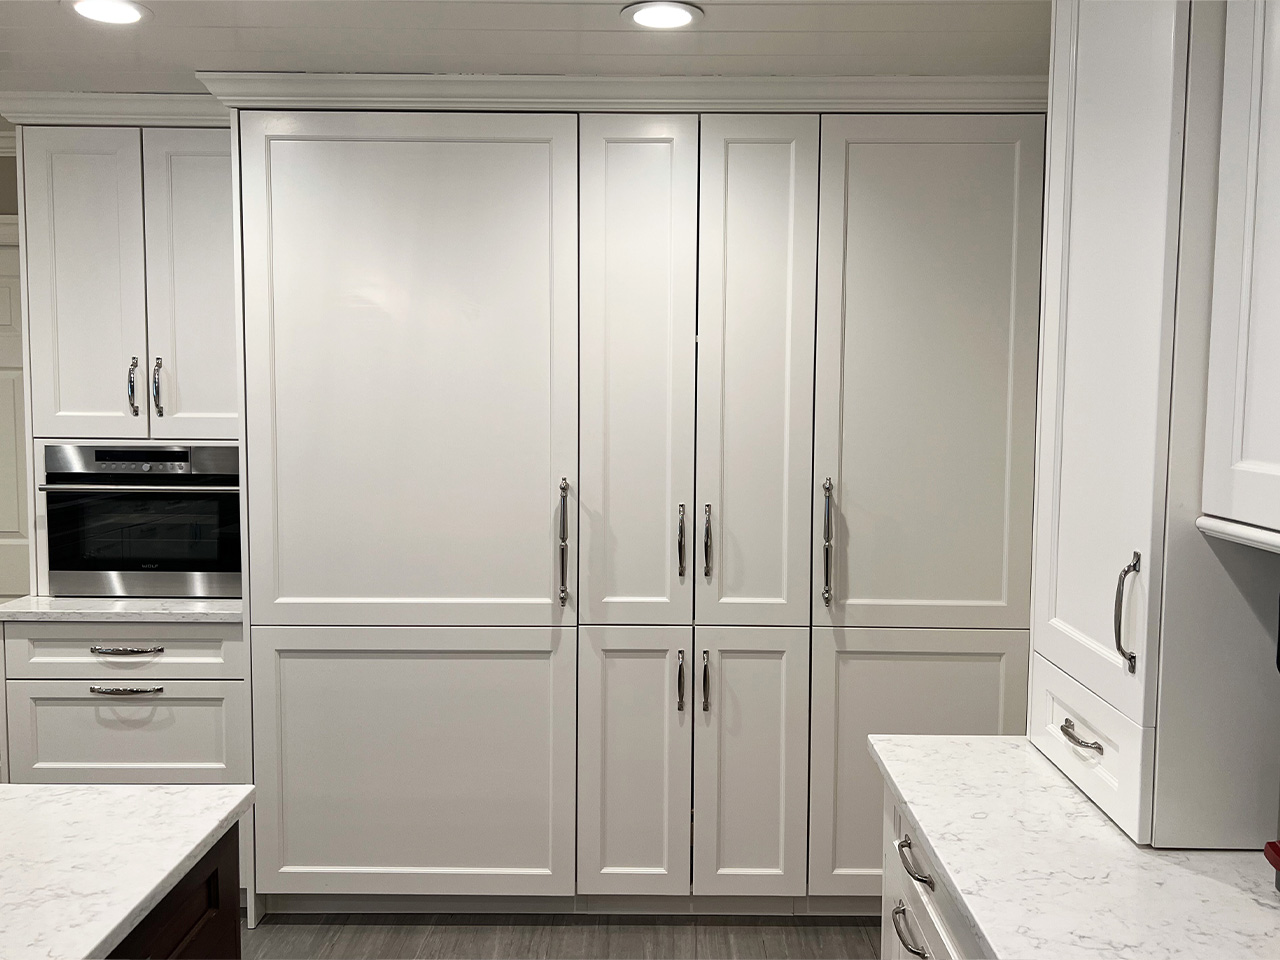 White Kitchen Integrated refrigerator Panels Closed, Wall Oven